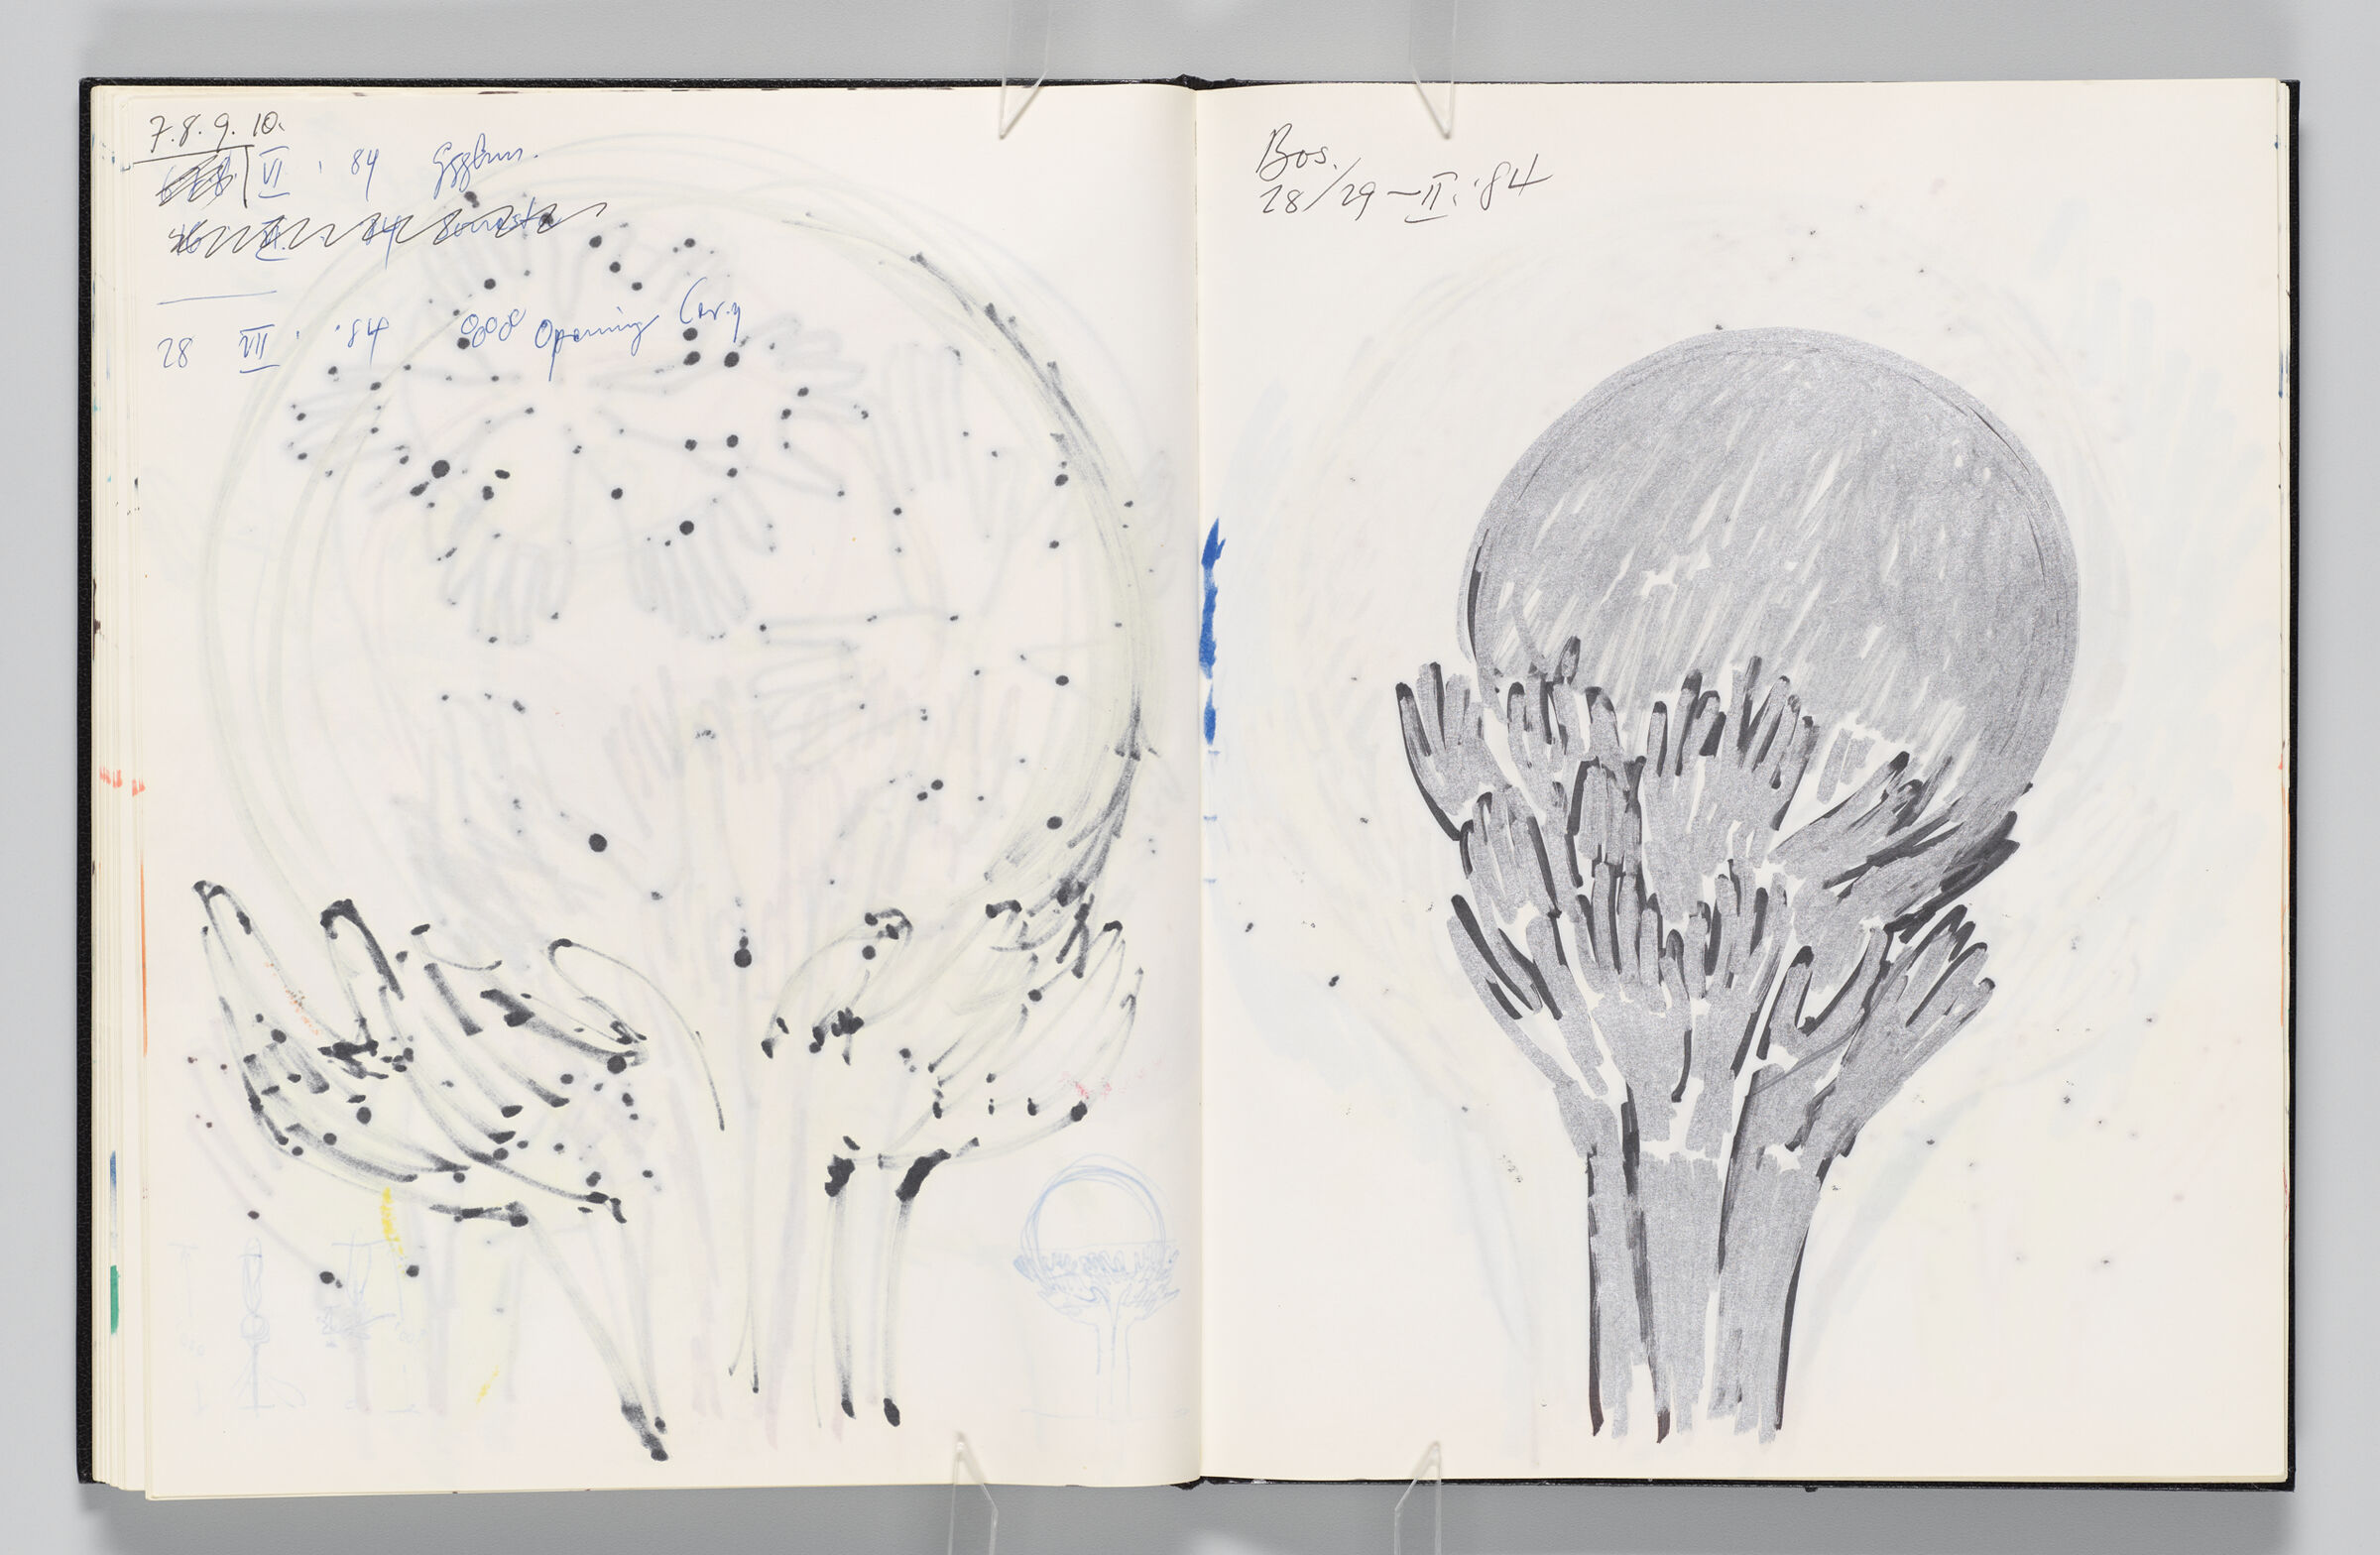 Untitled (Bleed-Through Of Previous Page, Left Page); Untitled (Hands Holding Globe, Right Page)